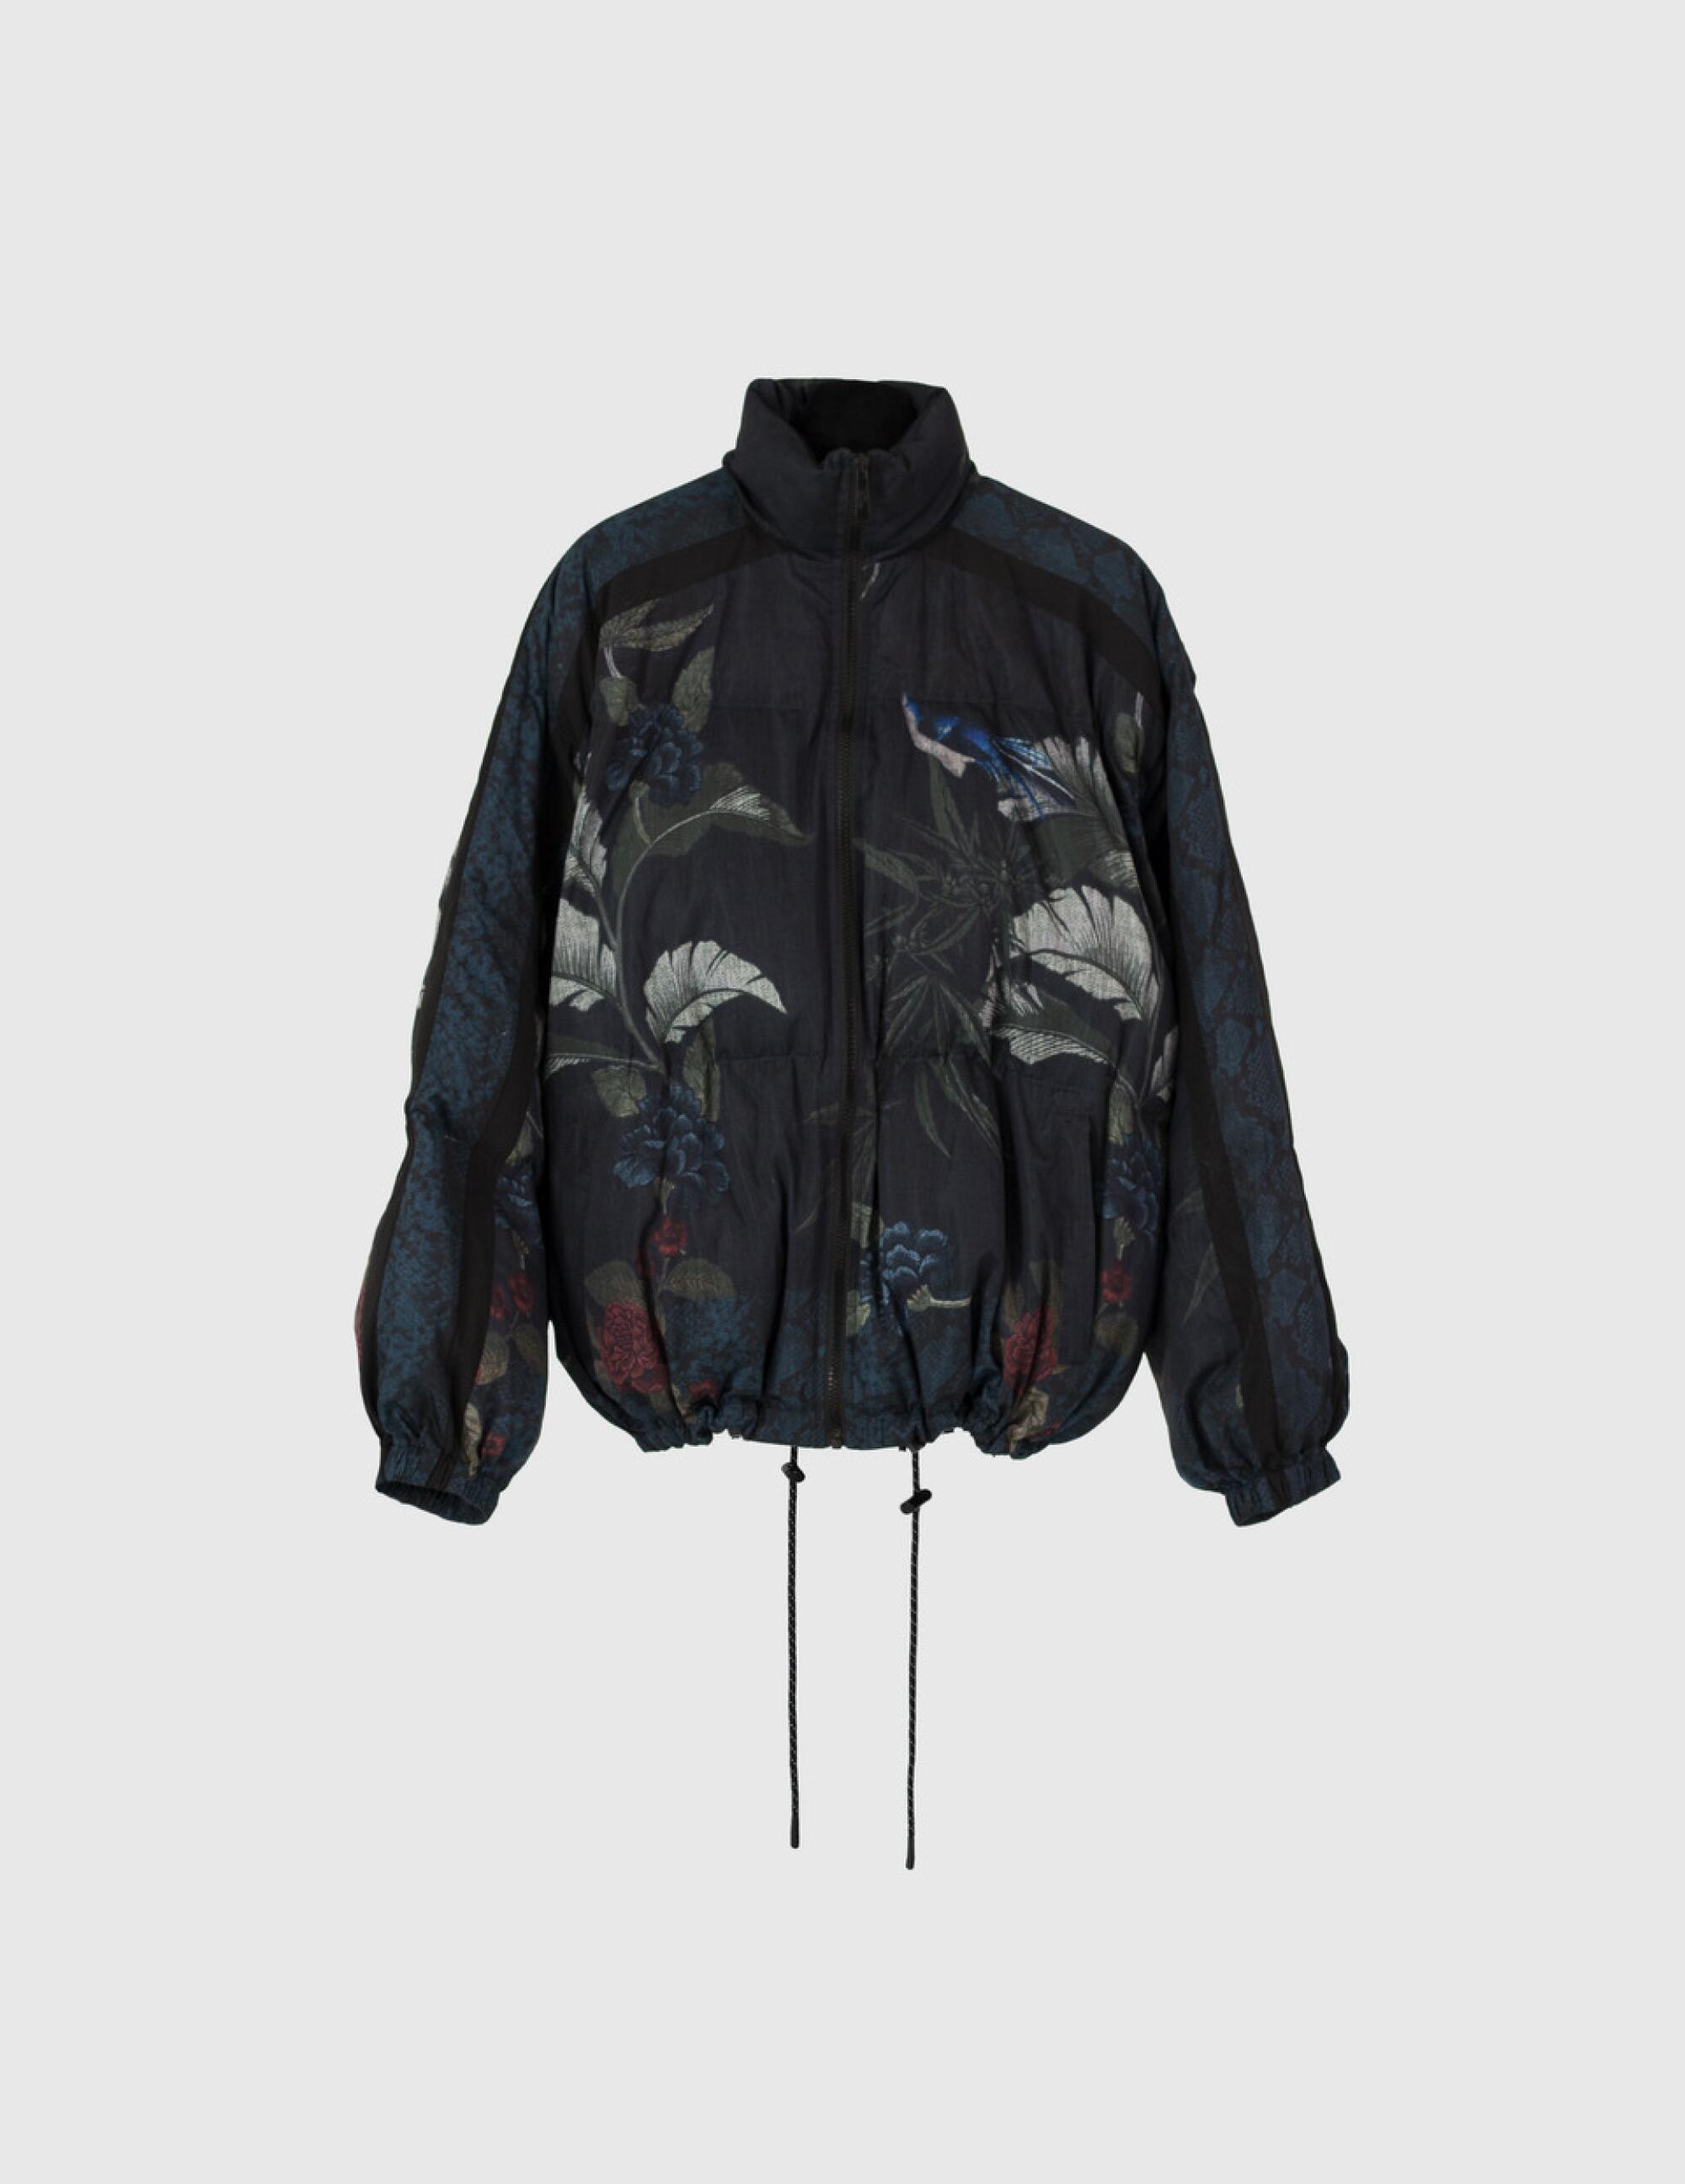 A black Potent Goods Offline puffer with white design